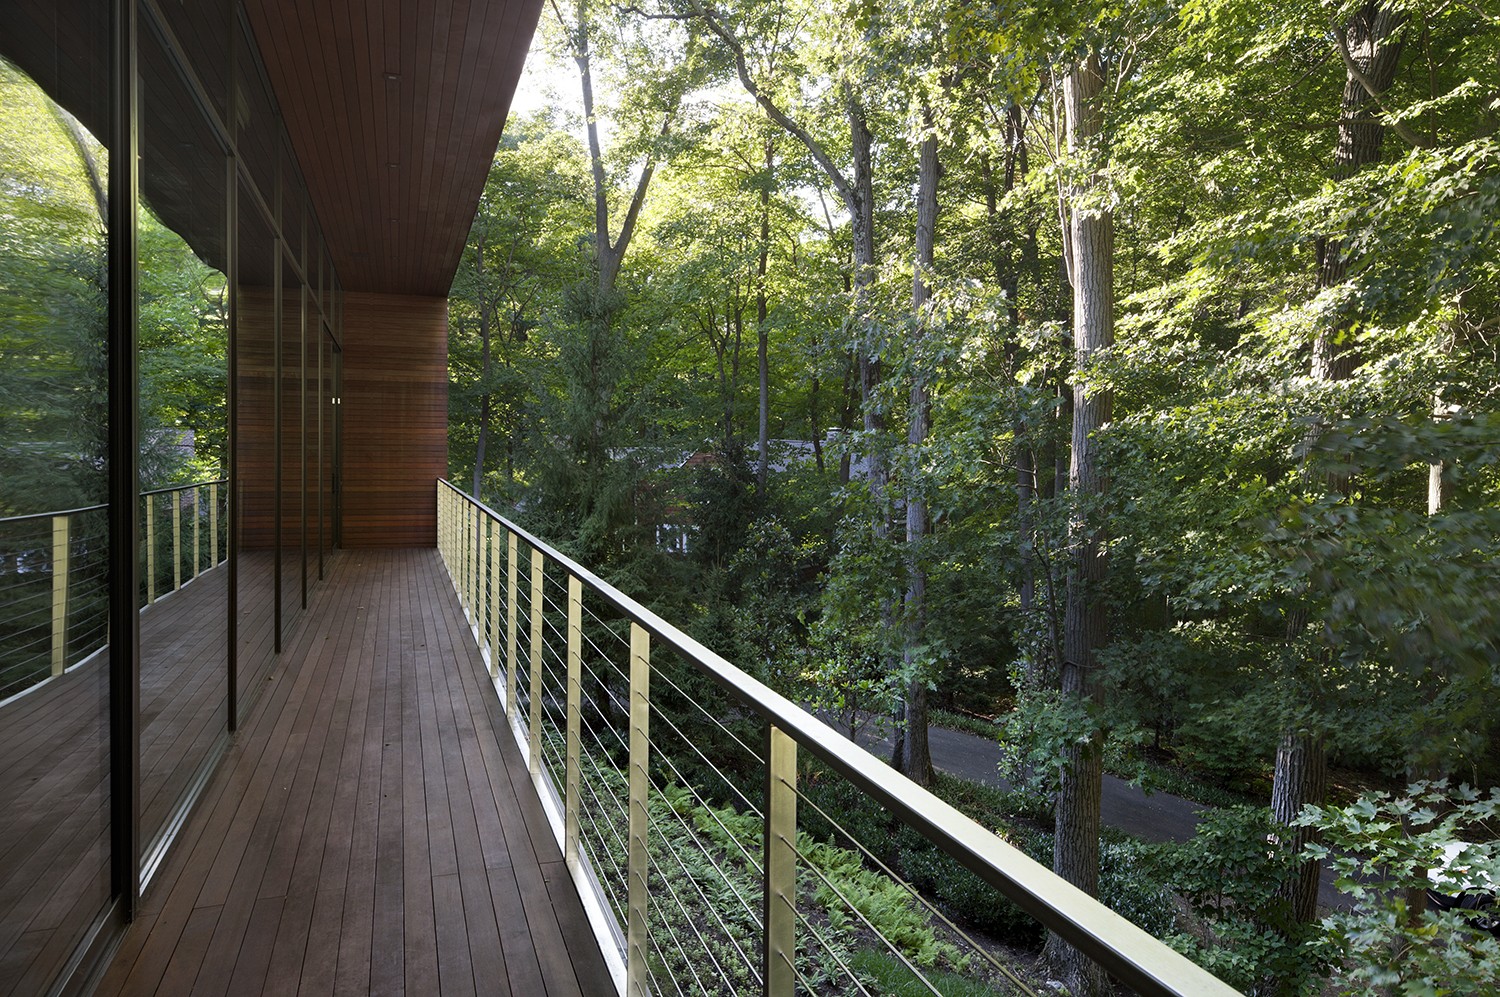 Ampersand Architecture: New Canaan House